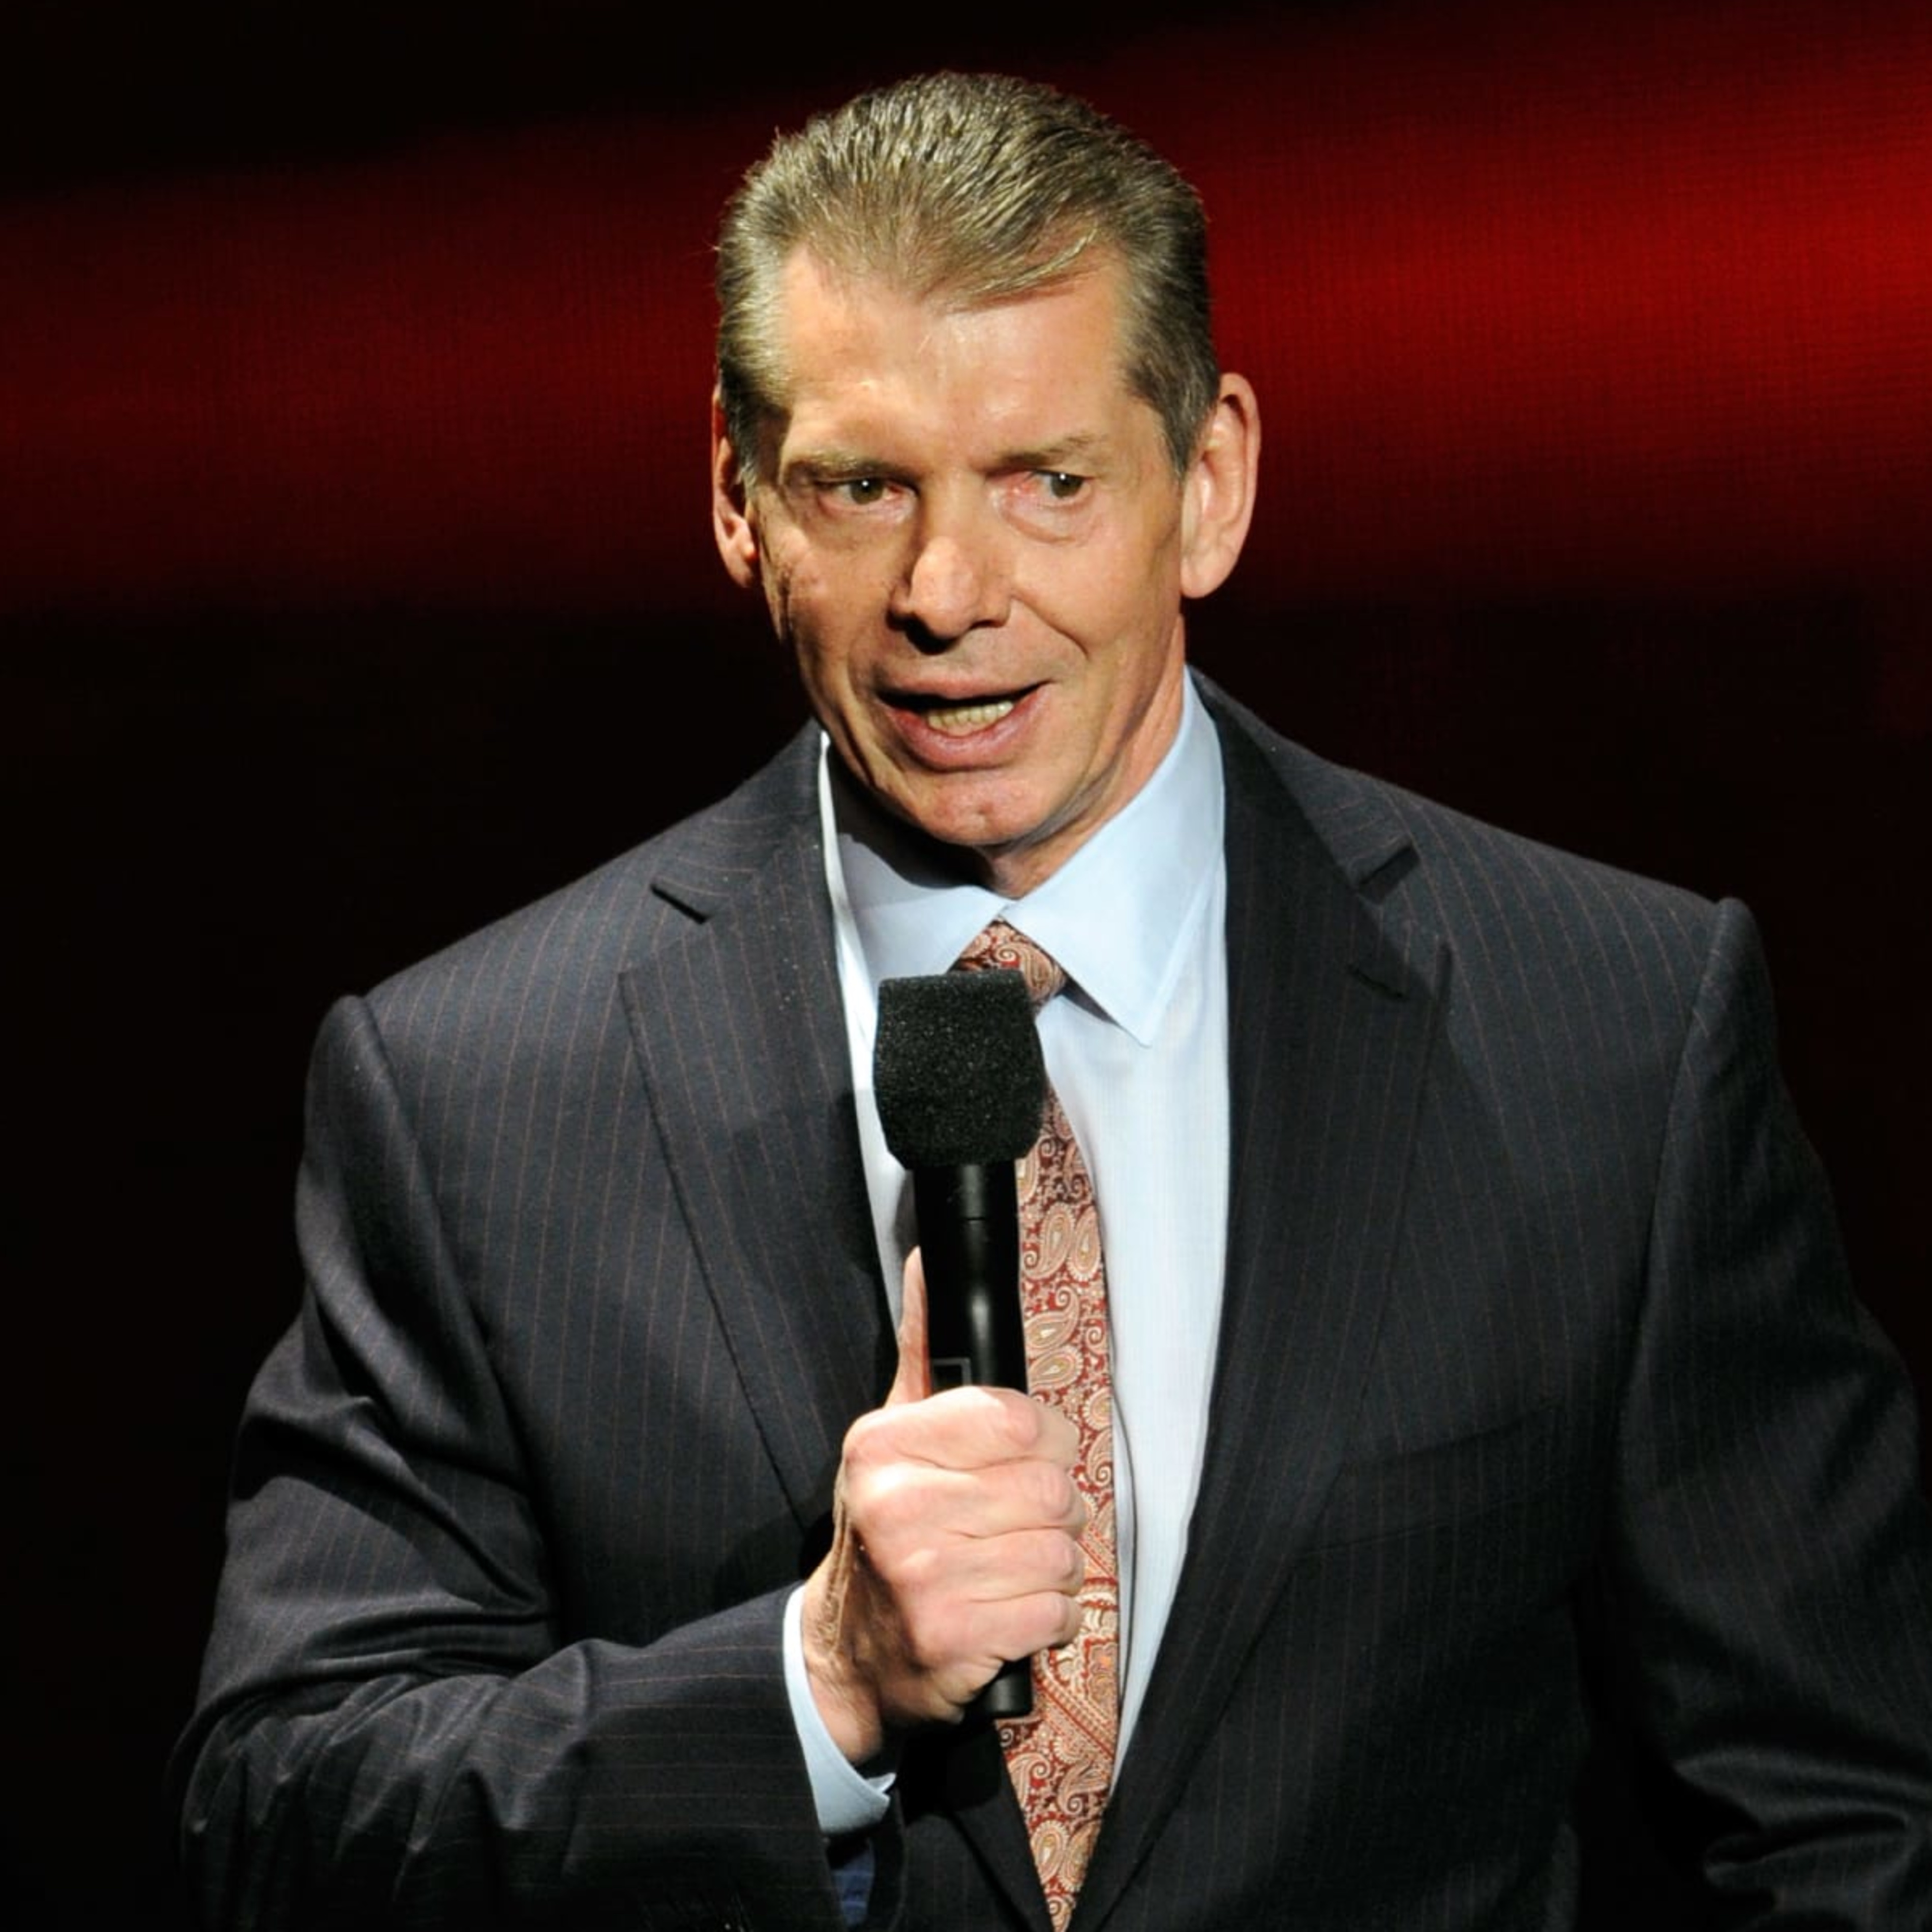 Report: Vince McMahon’s WWE Retirement ‘Hastened’ by Investigations into Payments